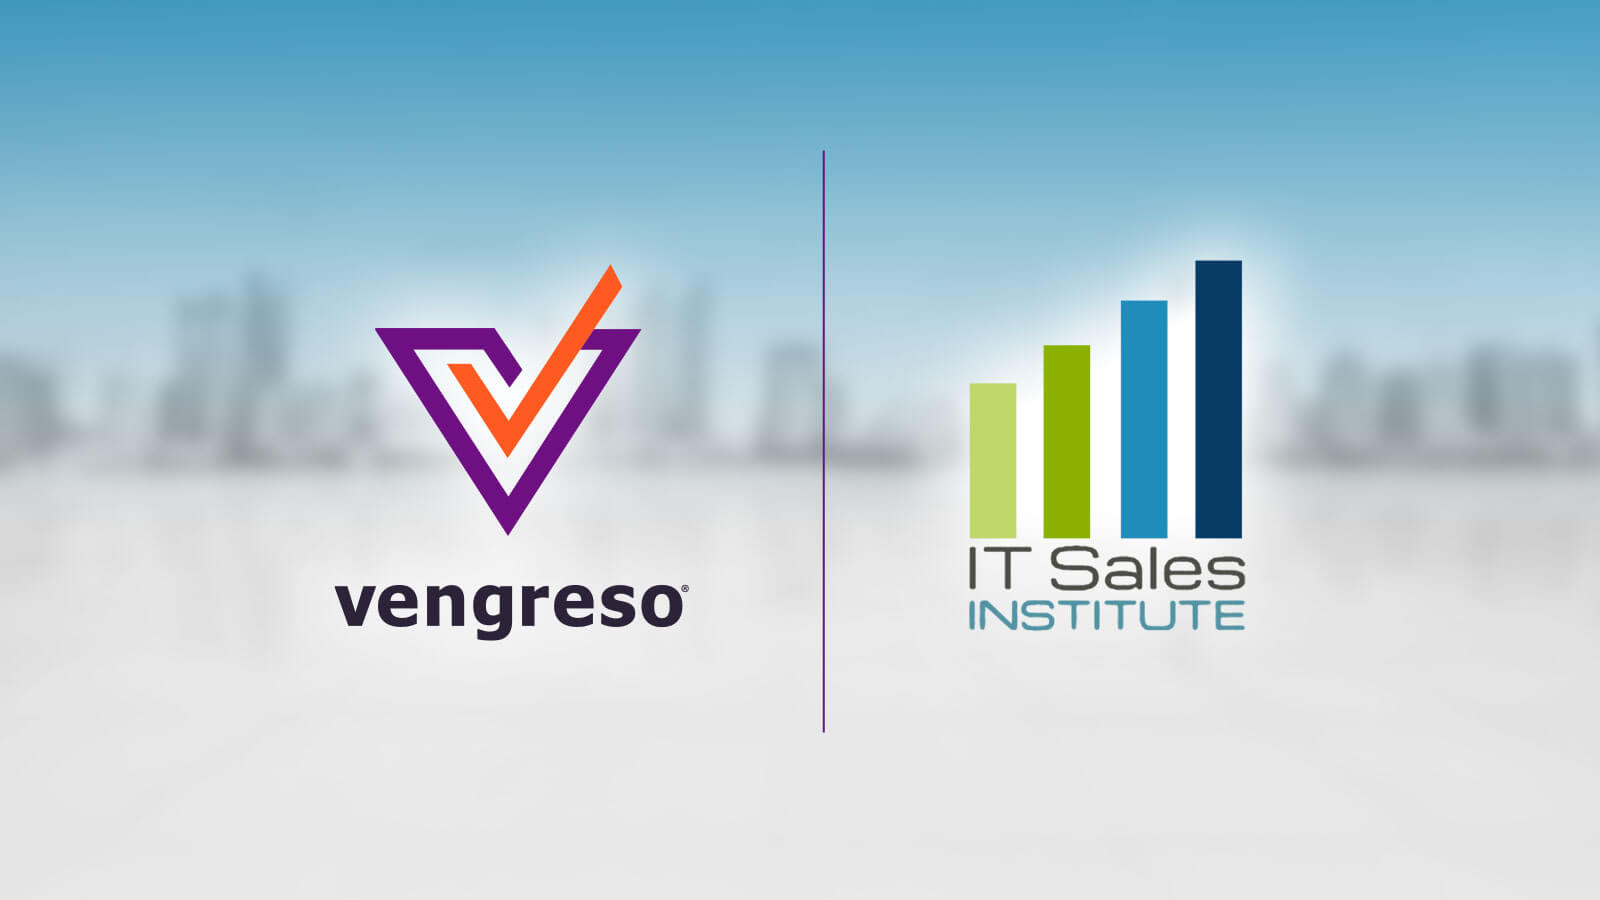 Vengreso and the IT Sales Institute partner to boost IT sales in Europe.